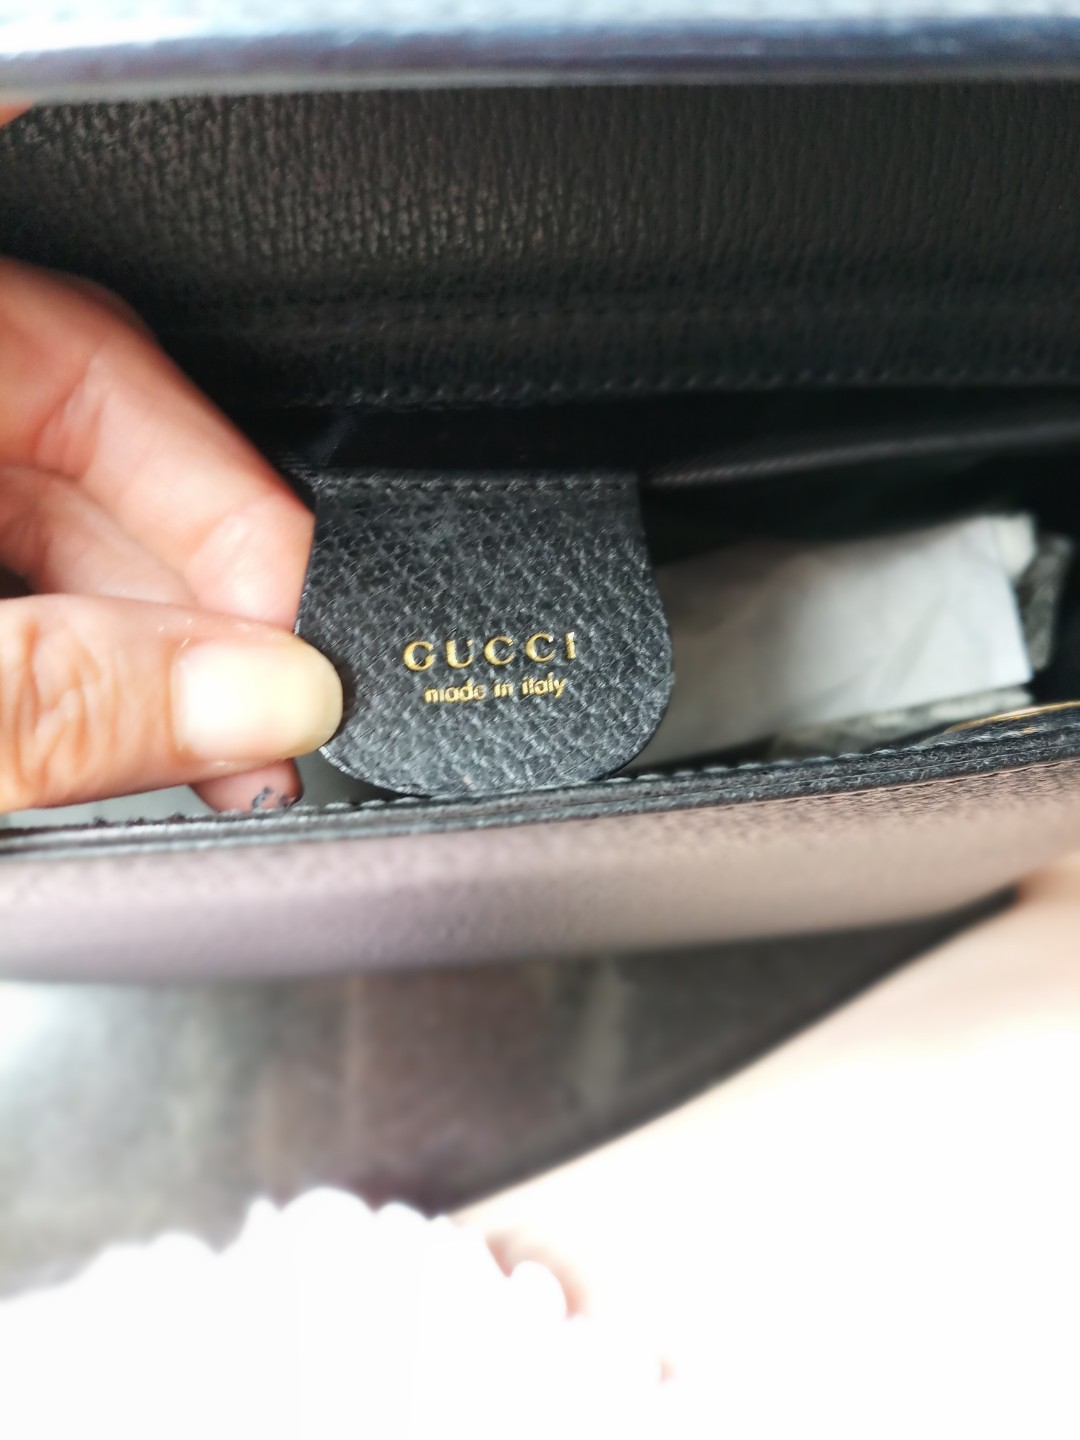 Gucci leather bag